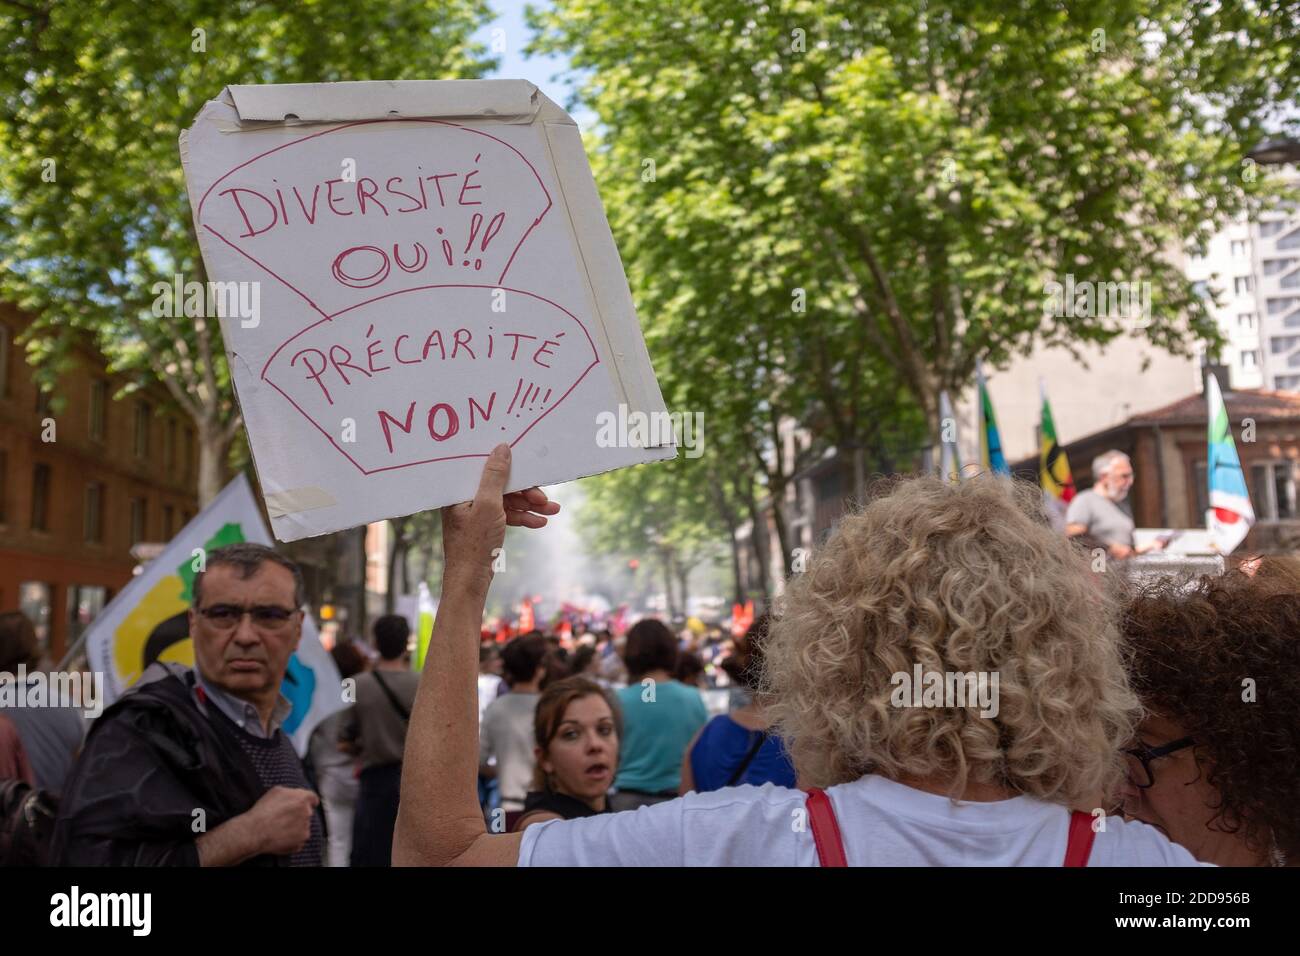 Thousands of demonstrators marched through the streets of Toulouse (France) on May 22, 2018. Most public service unions have united to fight against the reforms of the government of Emmanuel Macron, 1 year after his access to power. 'Diversity yes, precariousness no'. Photo by Patrick BATARD / ABACAPRESS.com Stock Photo